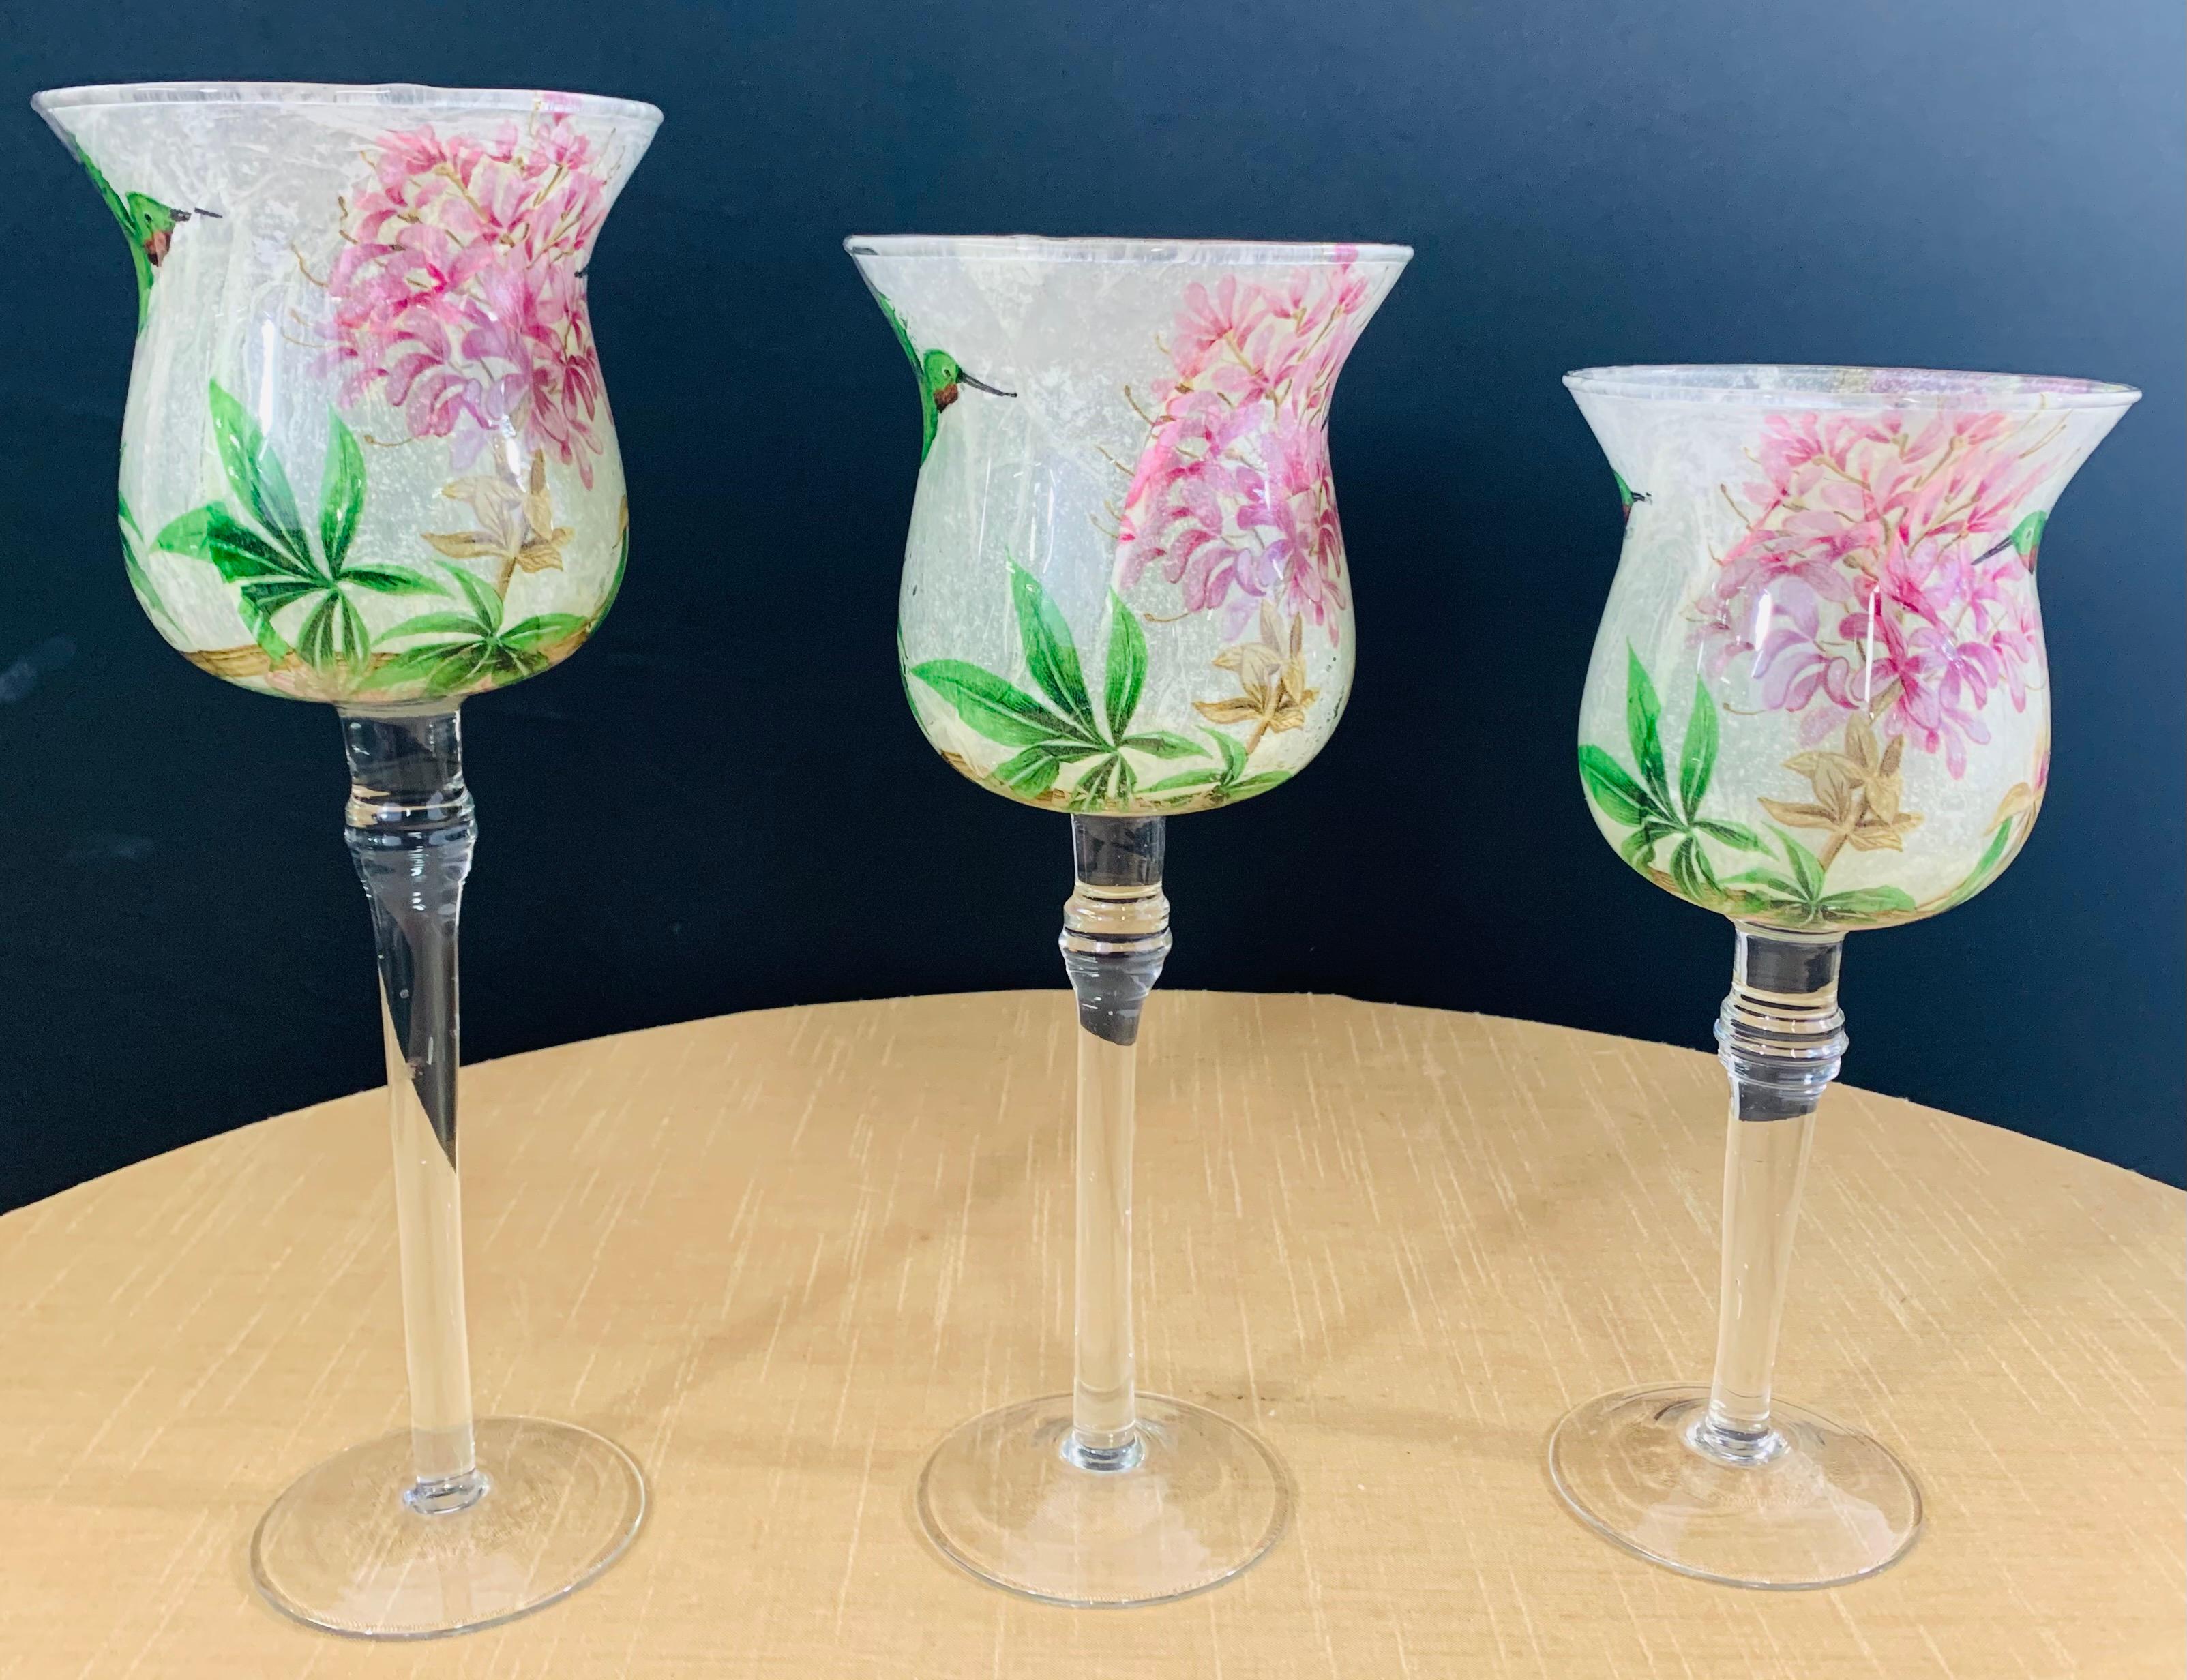 A stylish and decorative set of three glasses. Each glass has been permanently sand blast etched with the Hummingbird and flourish designs in a very spring like color tones including green, pink and light purple.

Dimensions: 
Large: 12